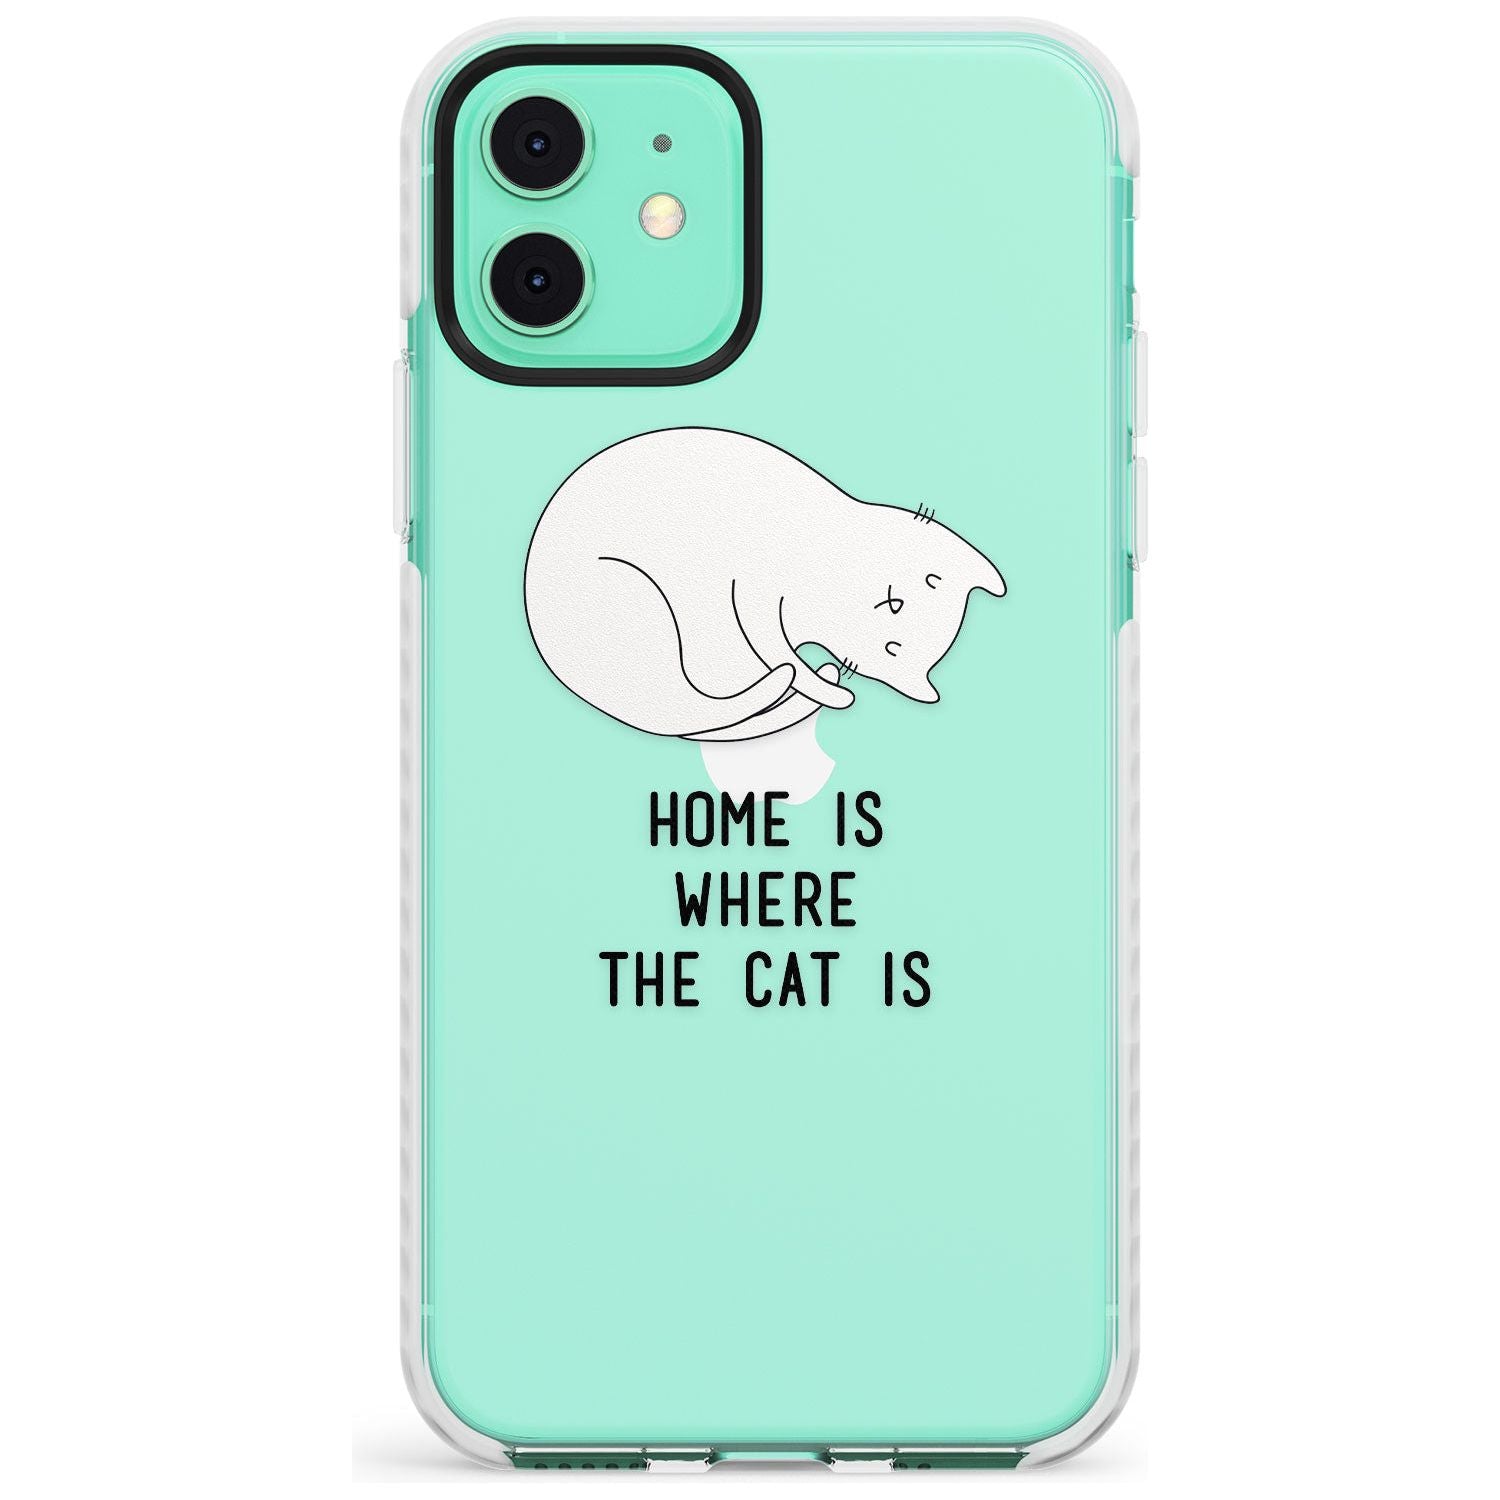 Home Is Where the Cat is Slim TPU Phone Case for iPhone 11